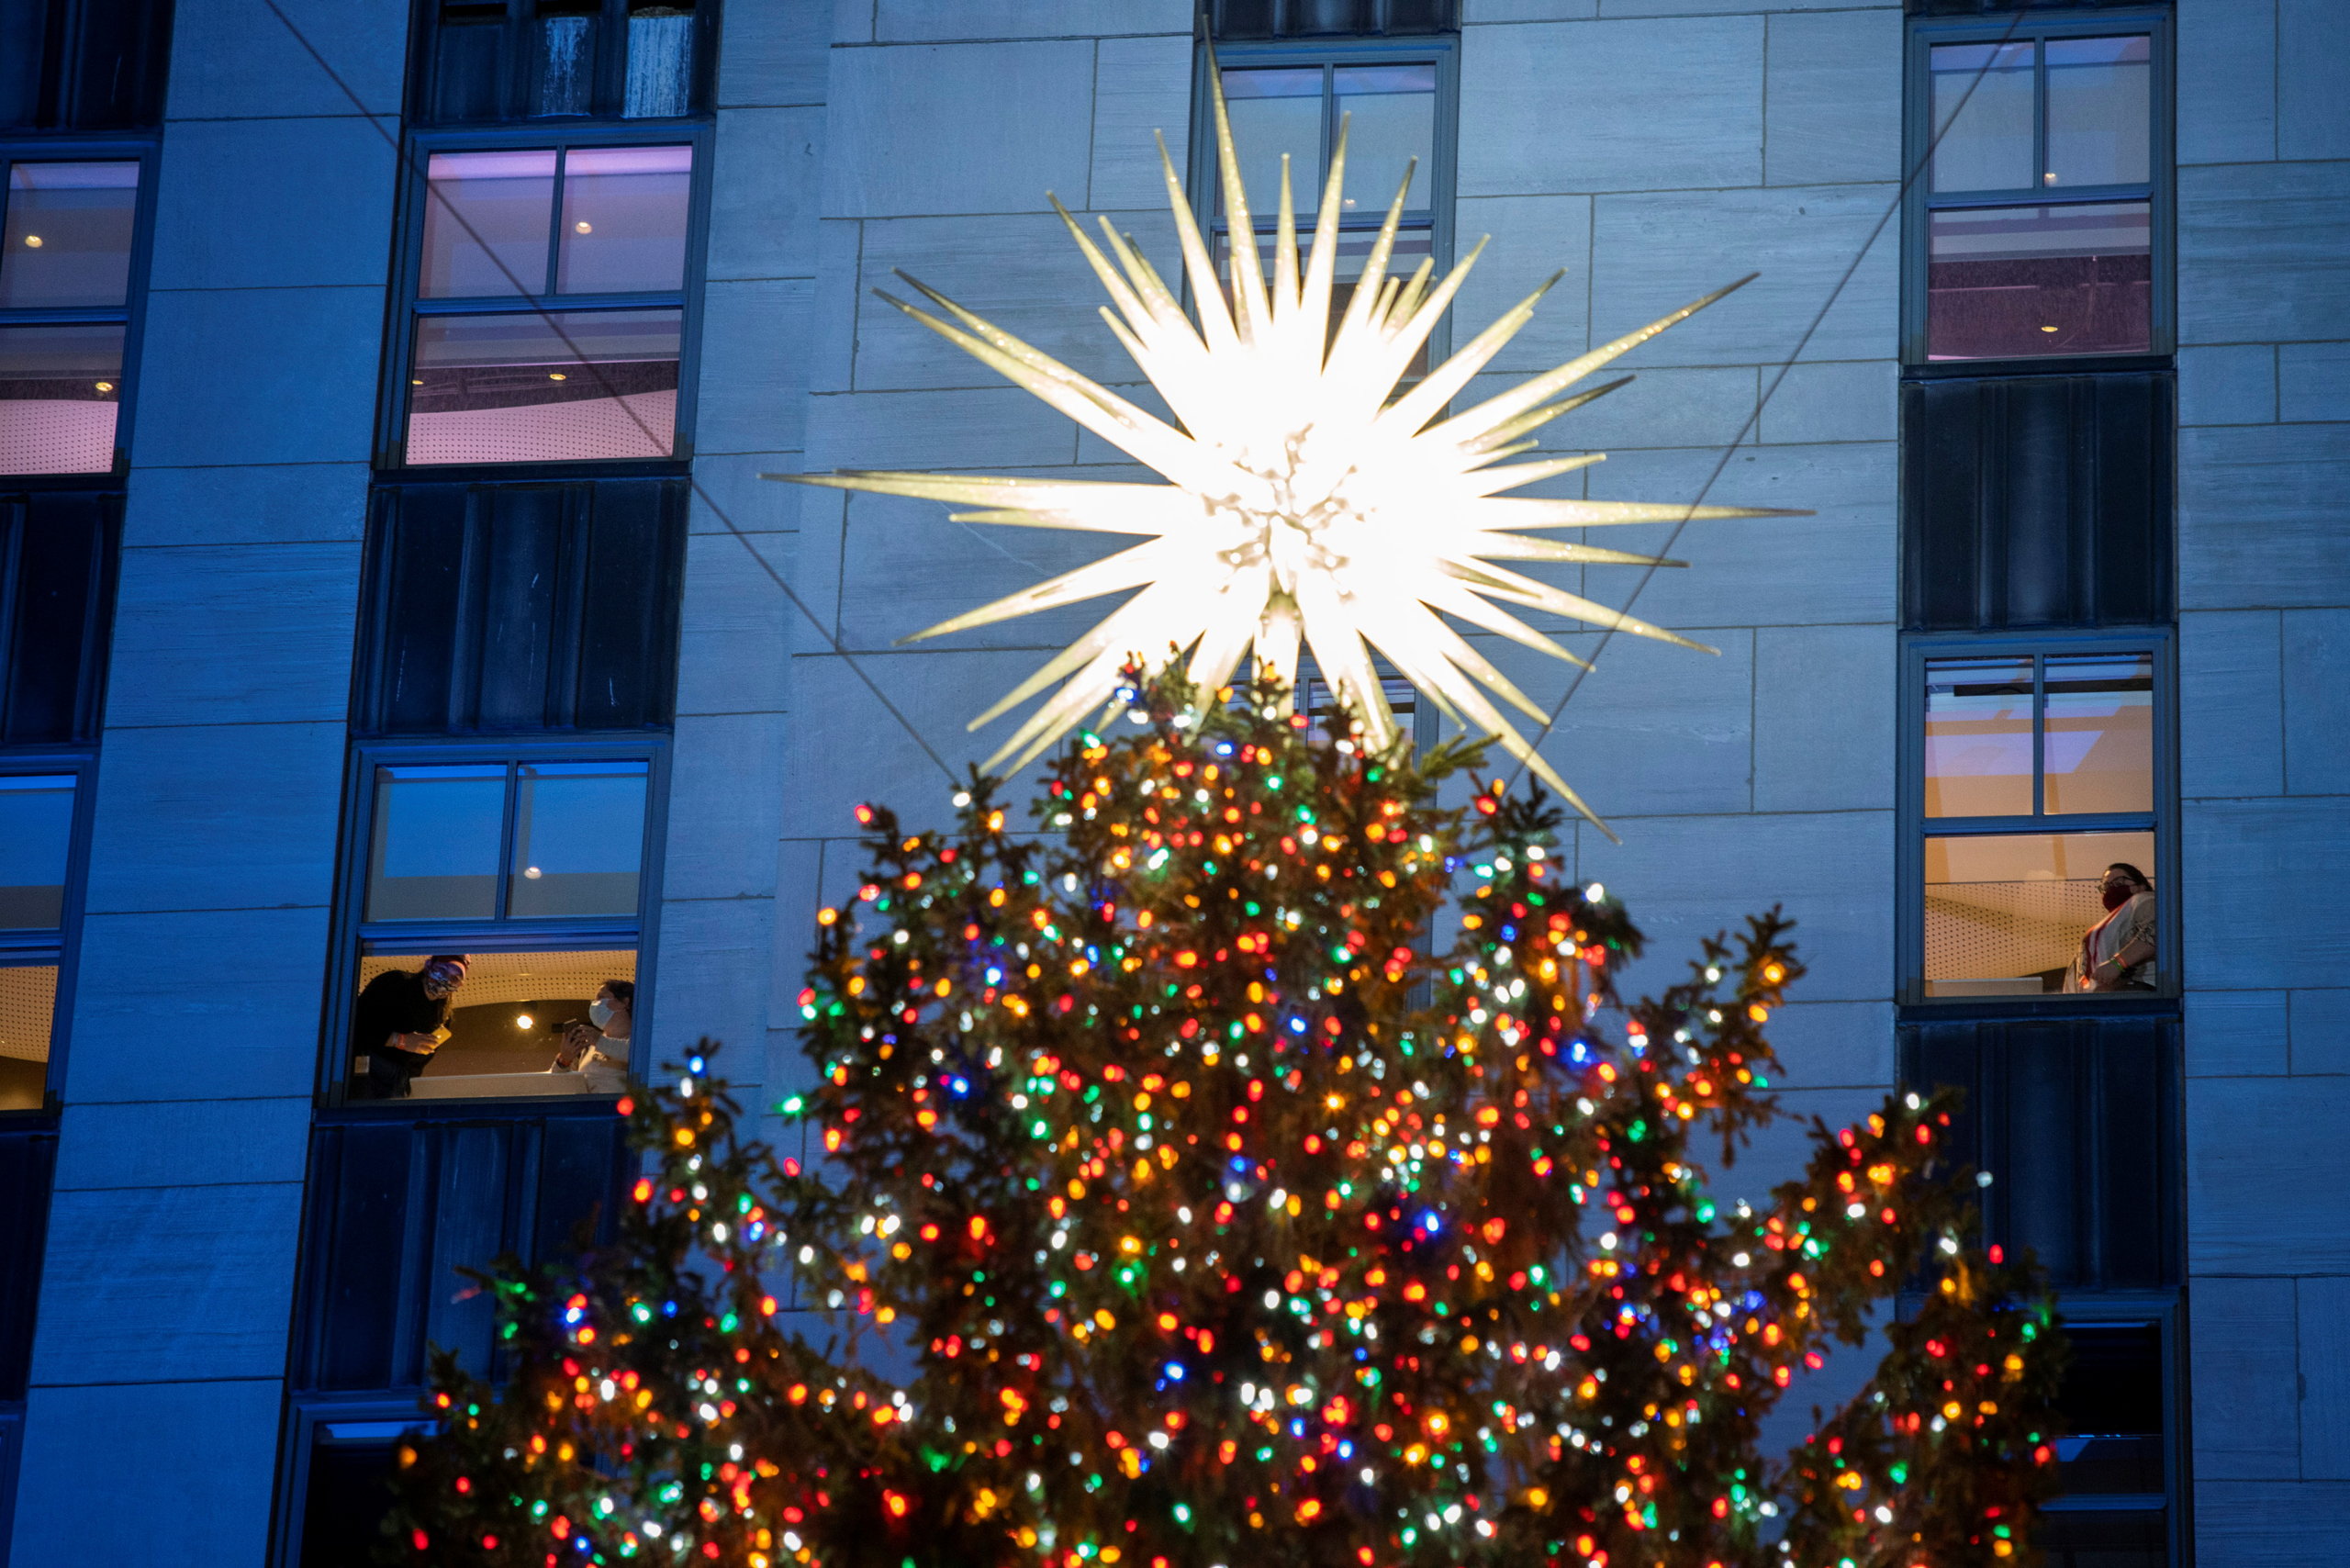 When do they light the tree at Rockefeller Center?